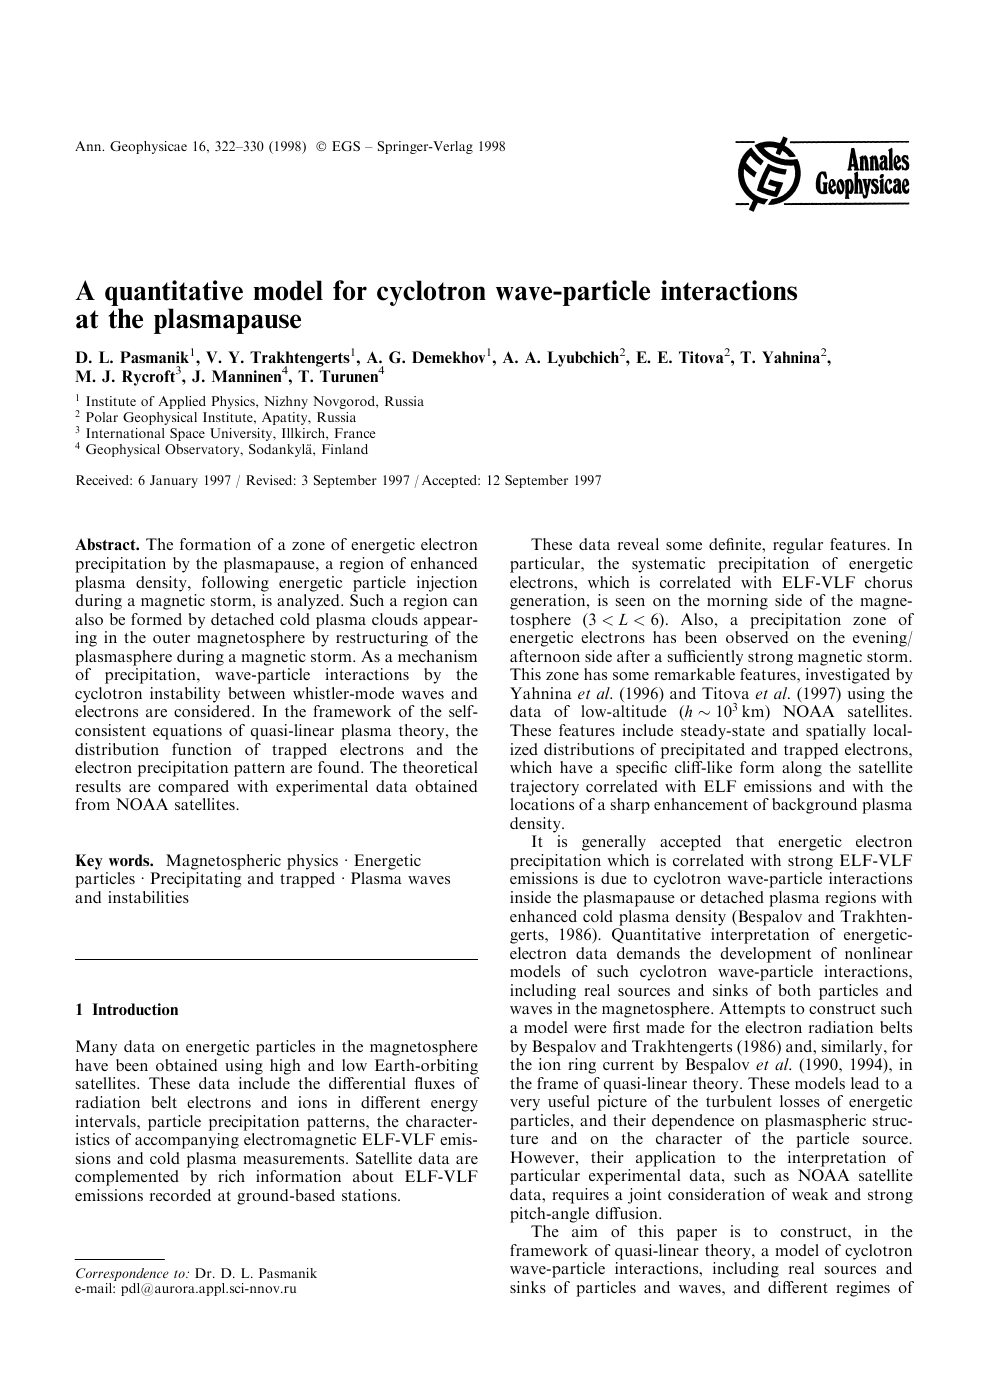 A Quantitative Model For Cyclotron Wave Particle Interactions At The Plasmapause Topic Of Research Paper In Physical Sciences Download Scholarly Article Pdf And Read For Free On Cyberleninka Open Science Hub